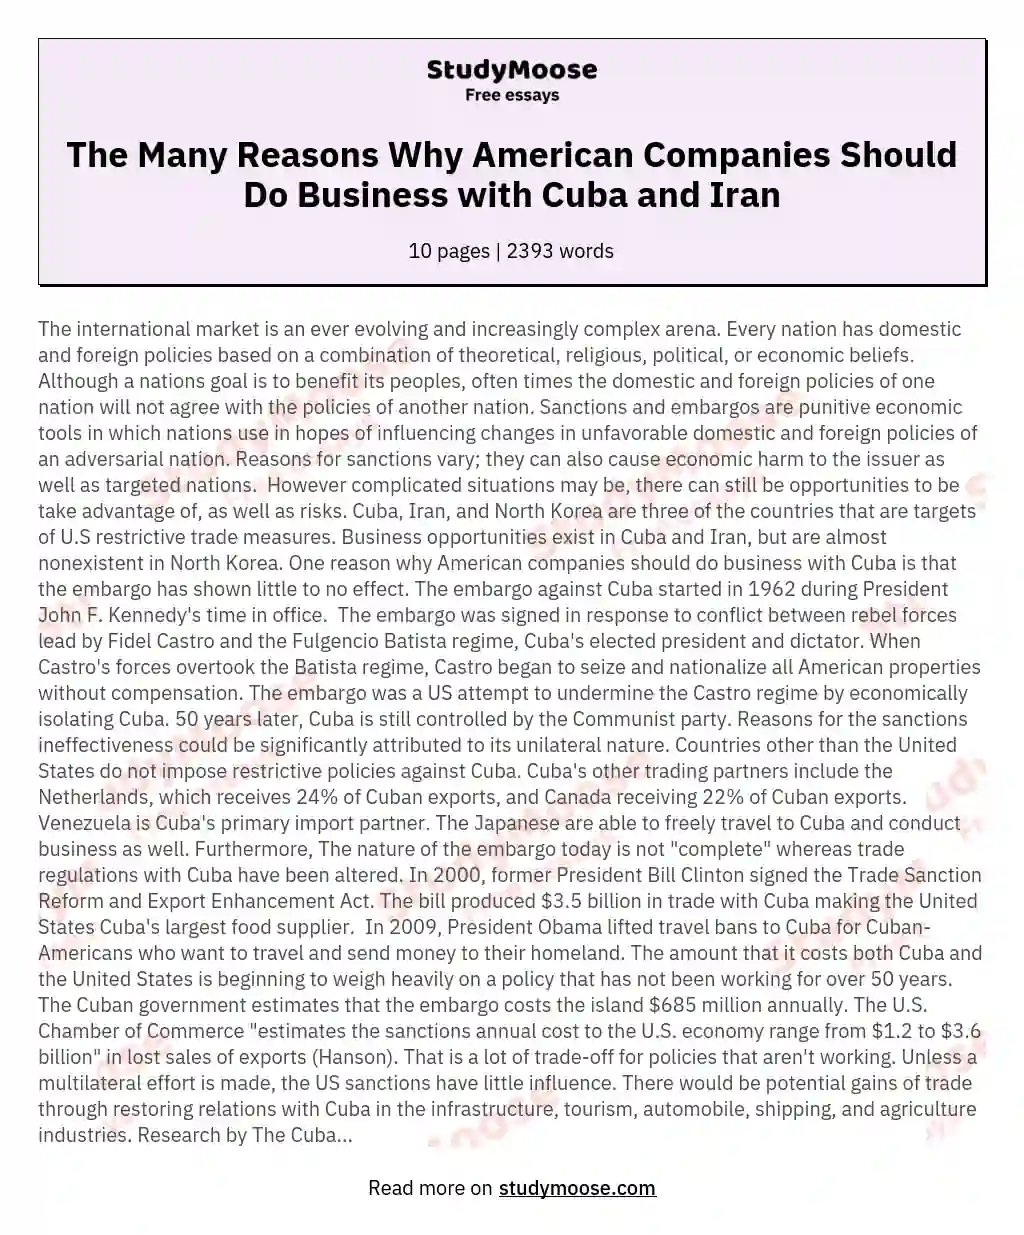 The Many Reasons Why American Companies Should Do Business with Cuba and Iran essay